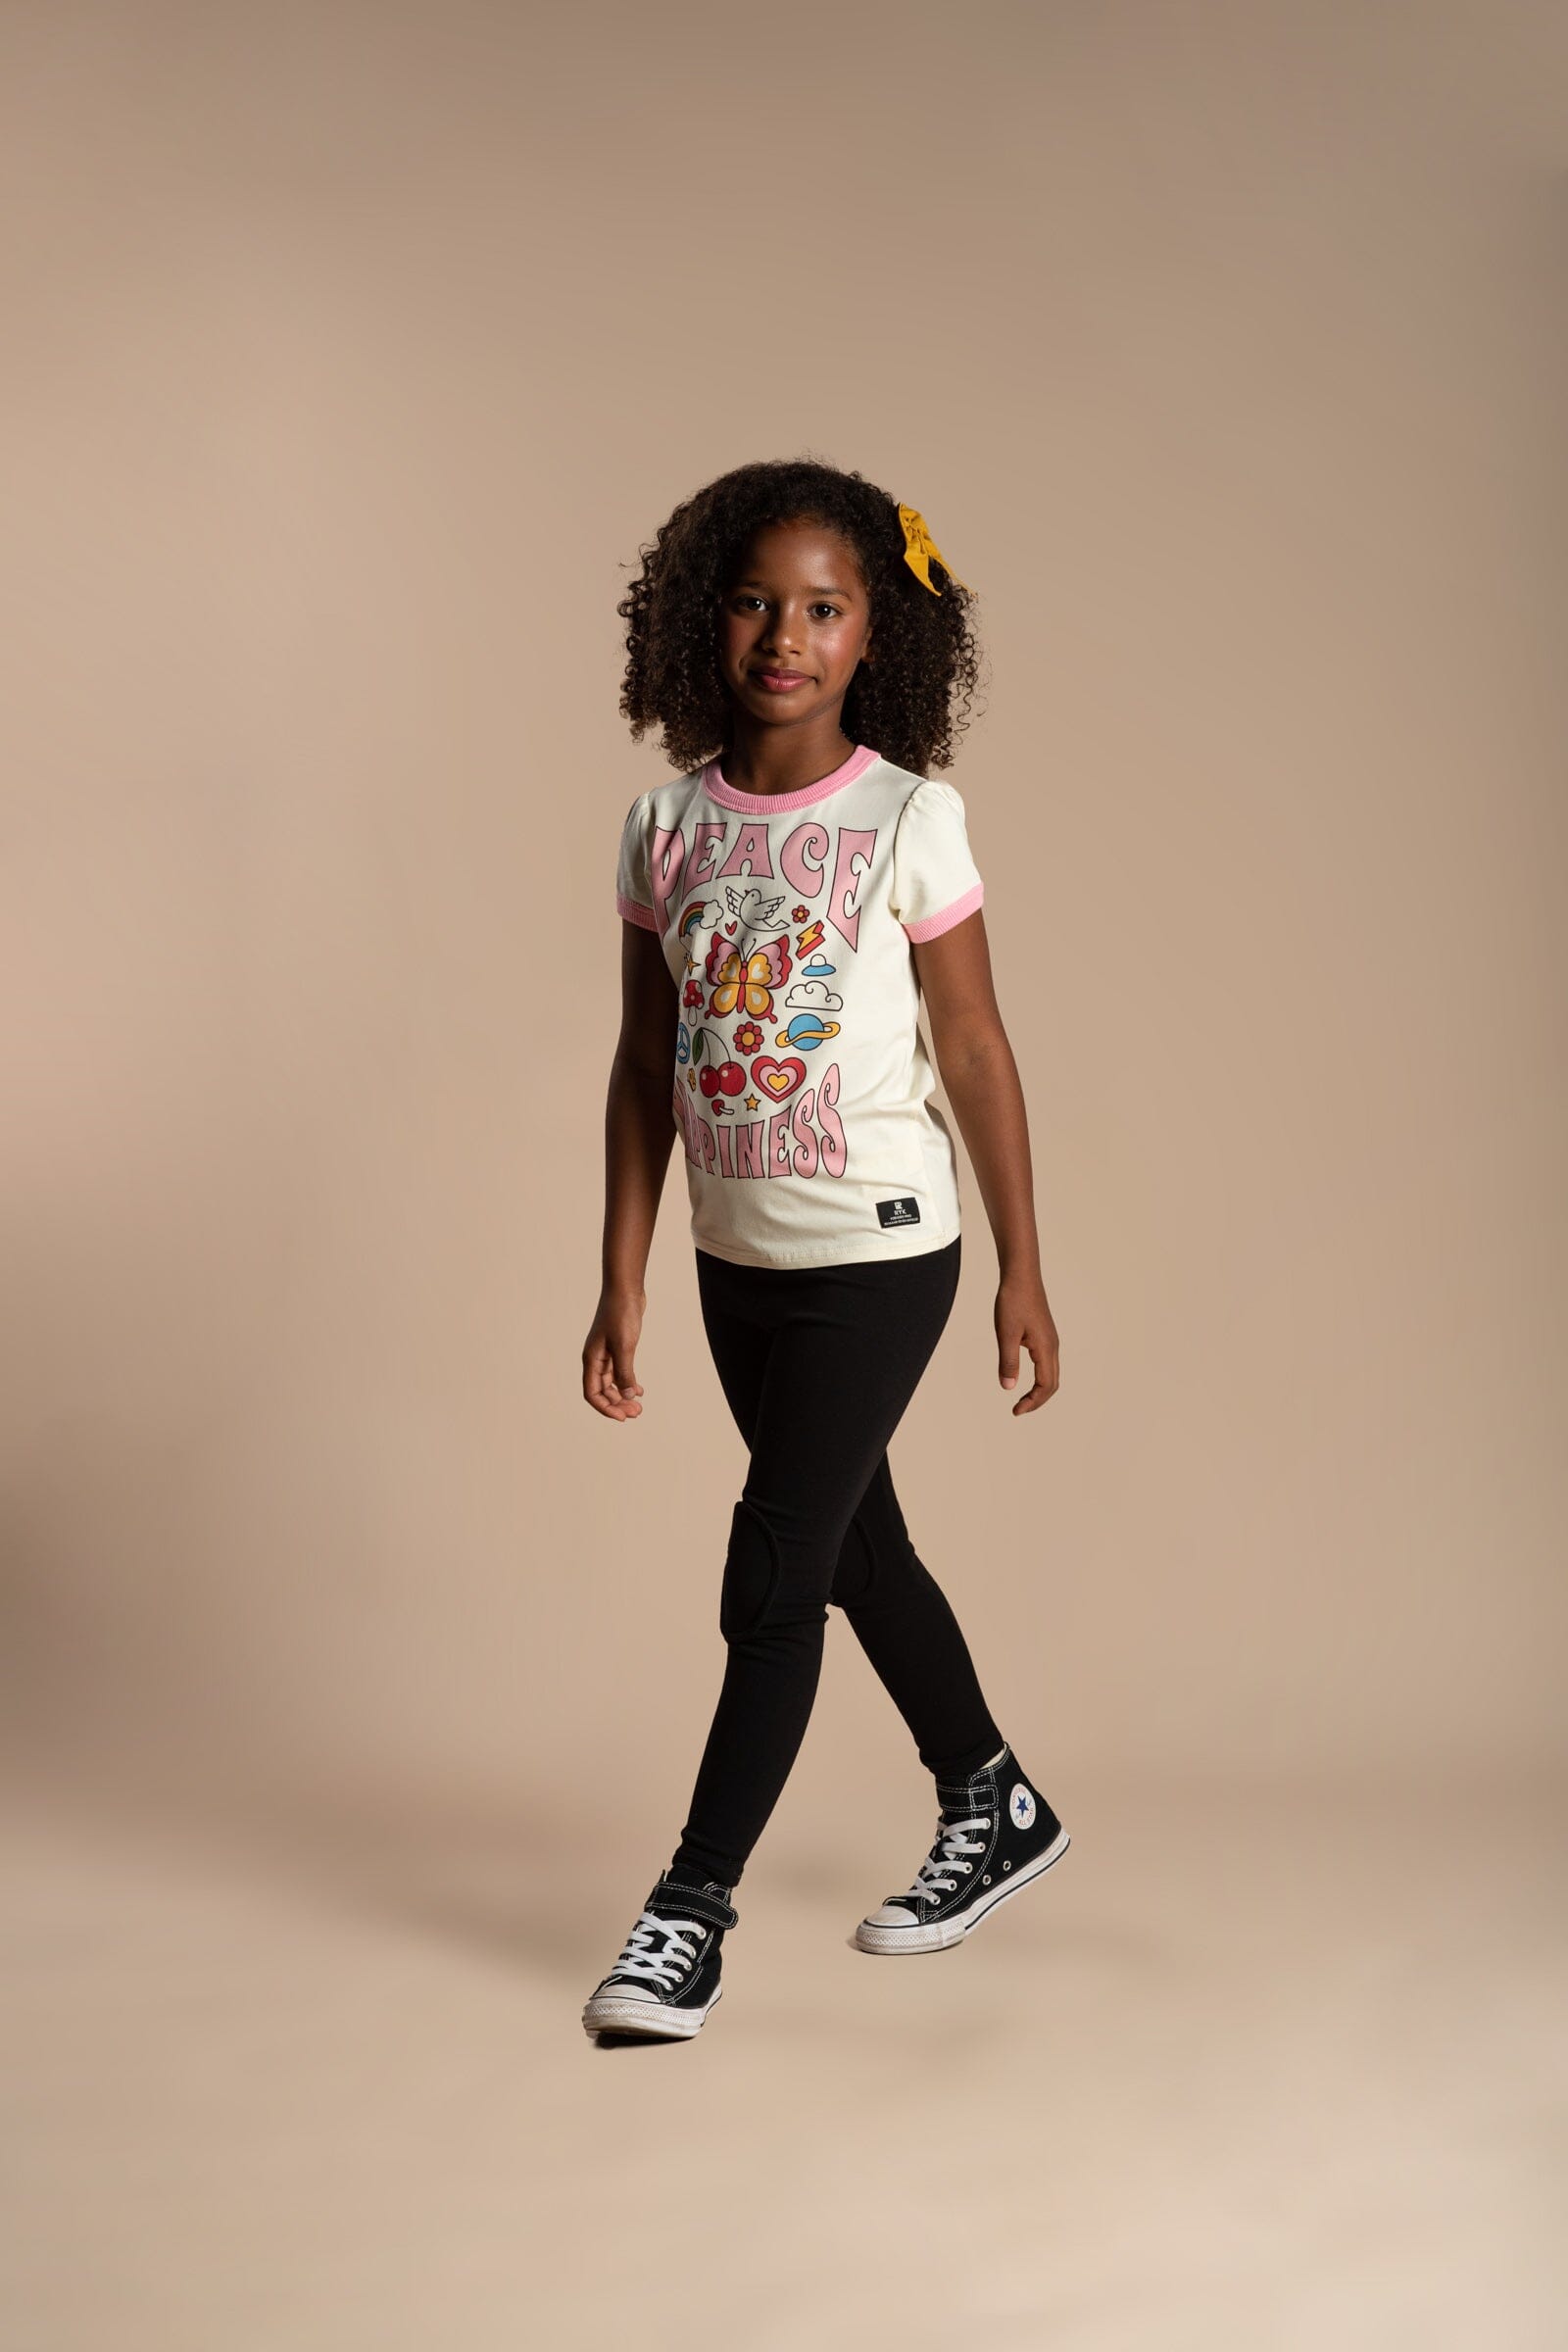 Rock Your Kid - BLACK KNEE PATCH TIGHTS - Black *** PRE ORDER / DUE EARLY APRIL *** Girls Rock Your Baby